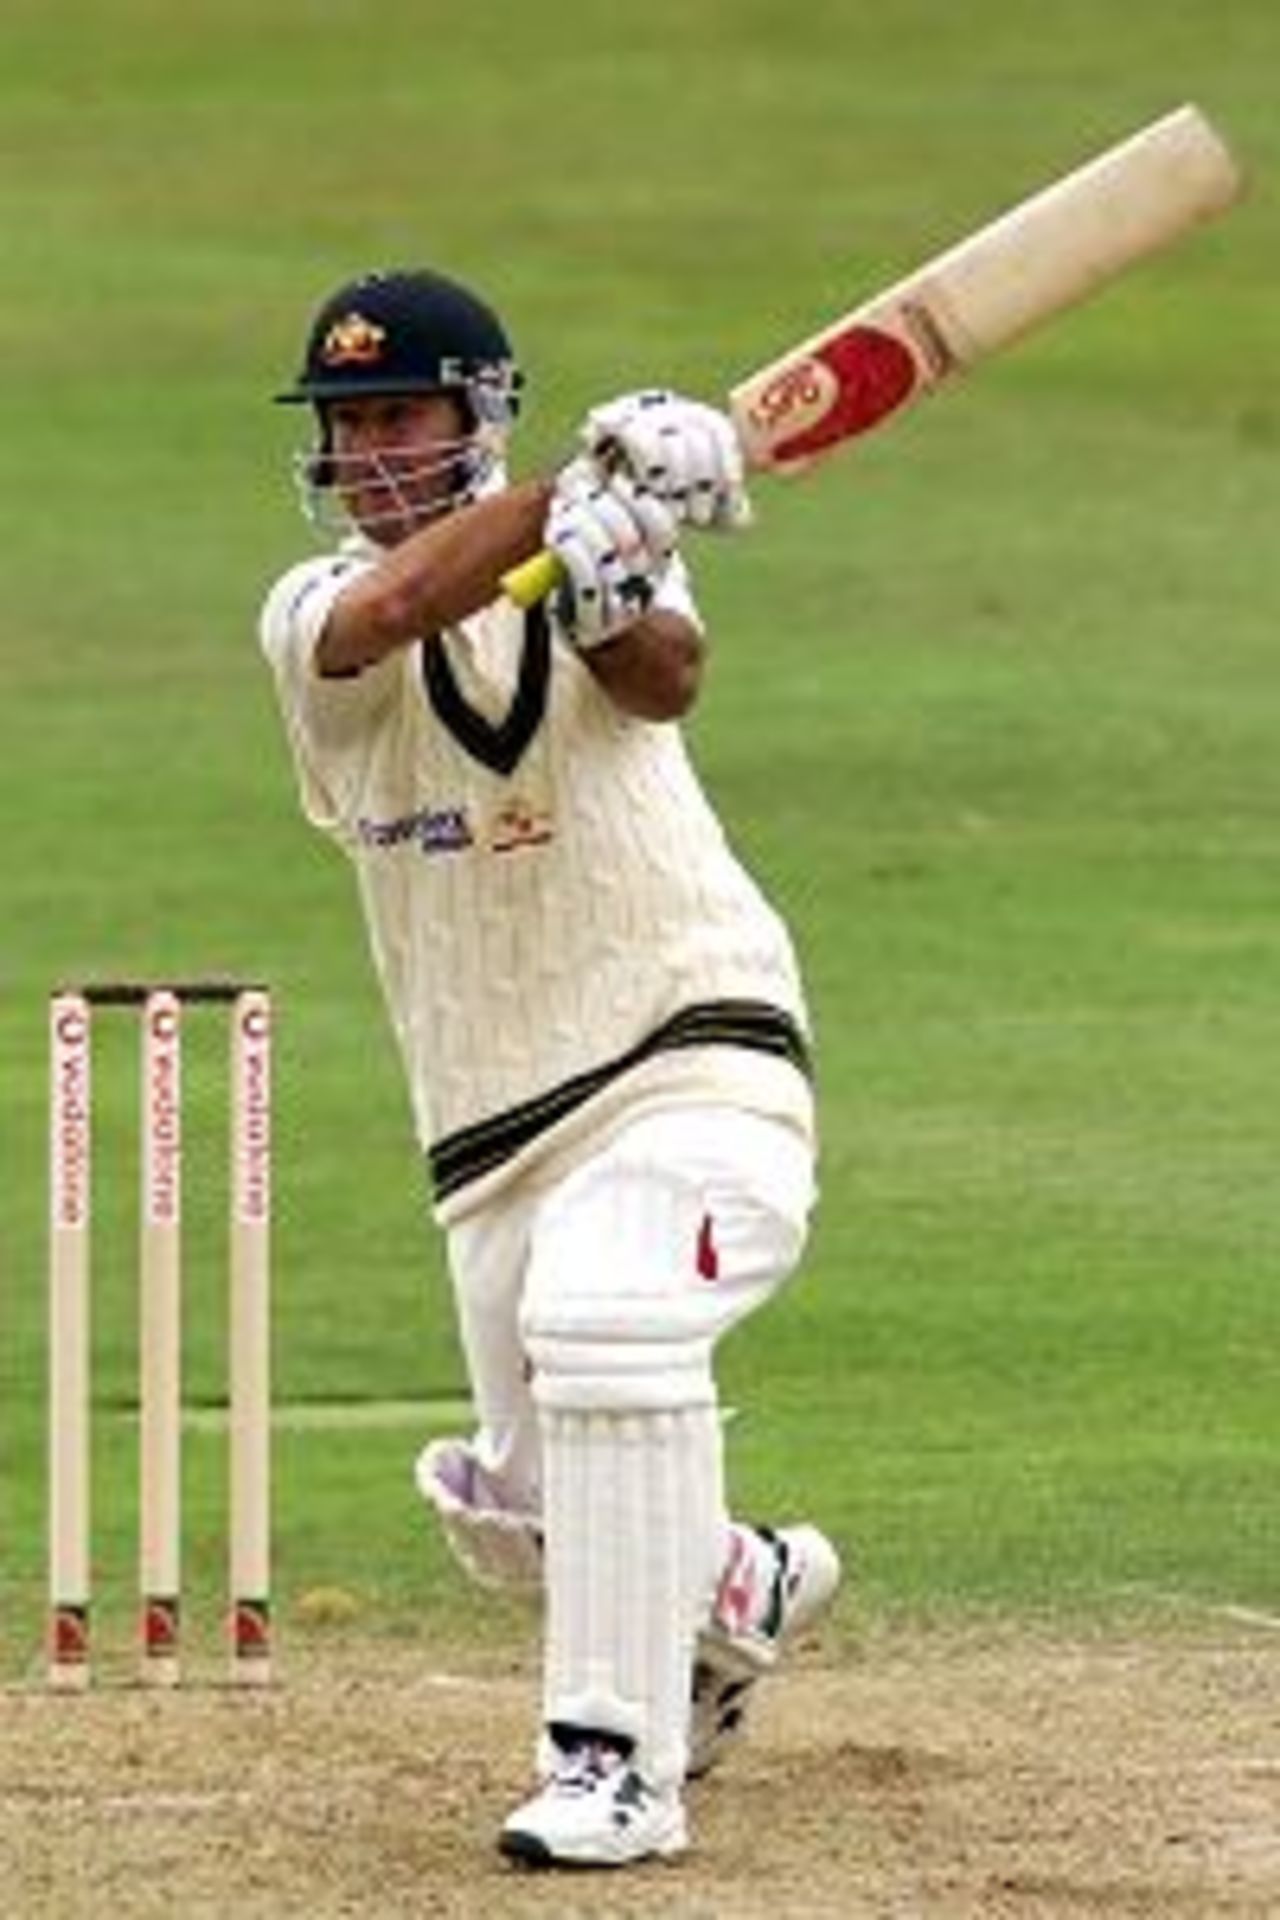 Ricky Ponting of Australia hits a four to bring up his hundred, during day one of the tour match between Somerset and Australia, played at Somerset County Ground, Taunton, England.